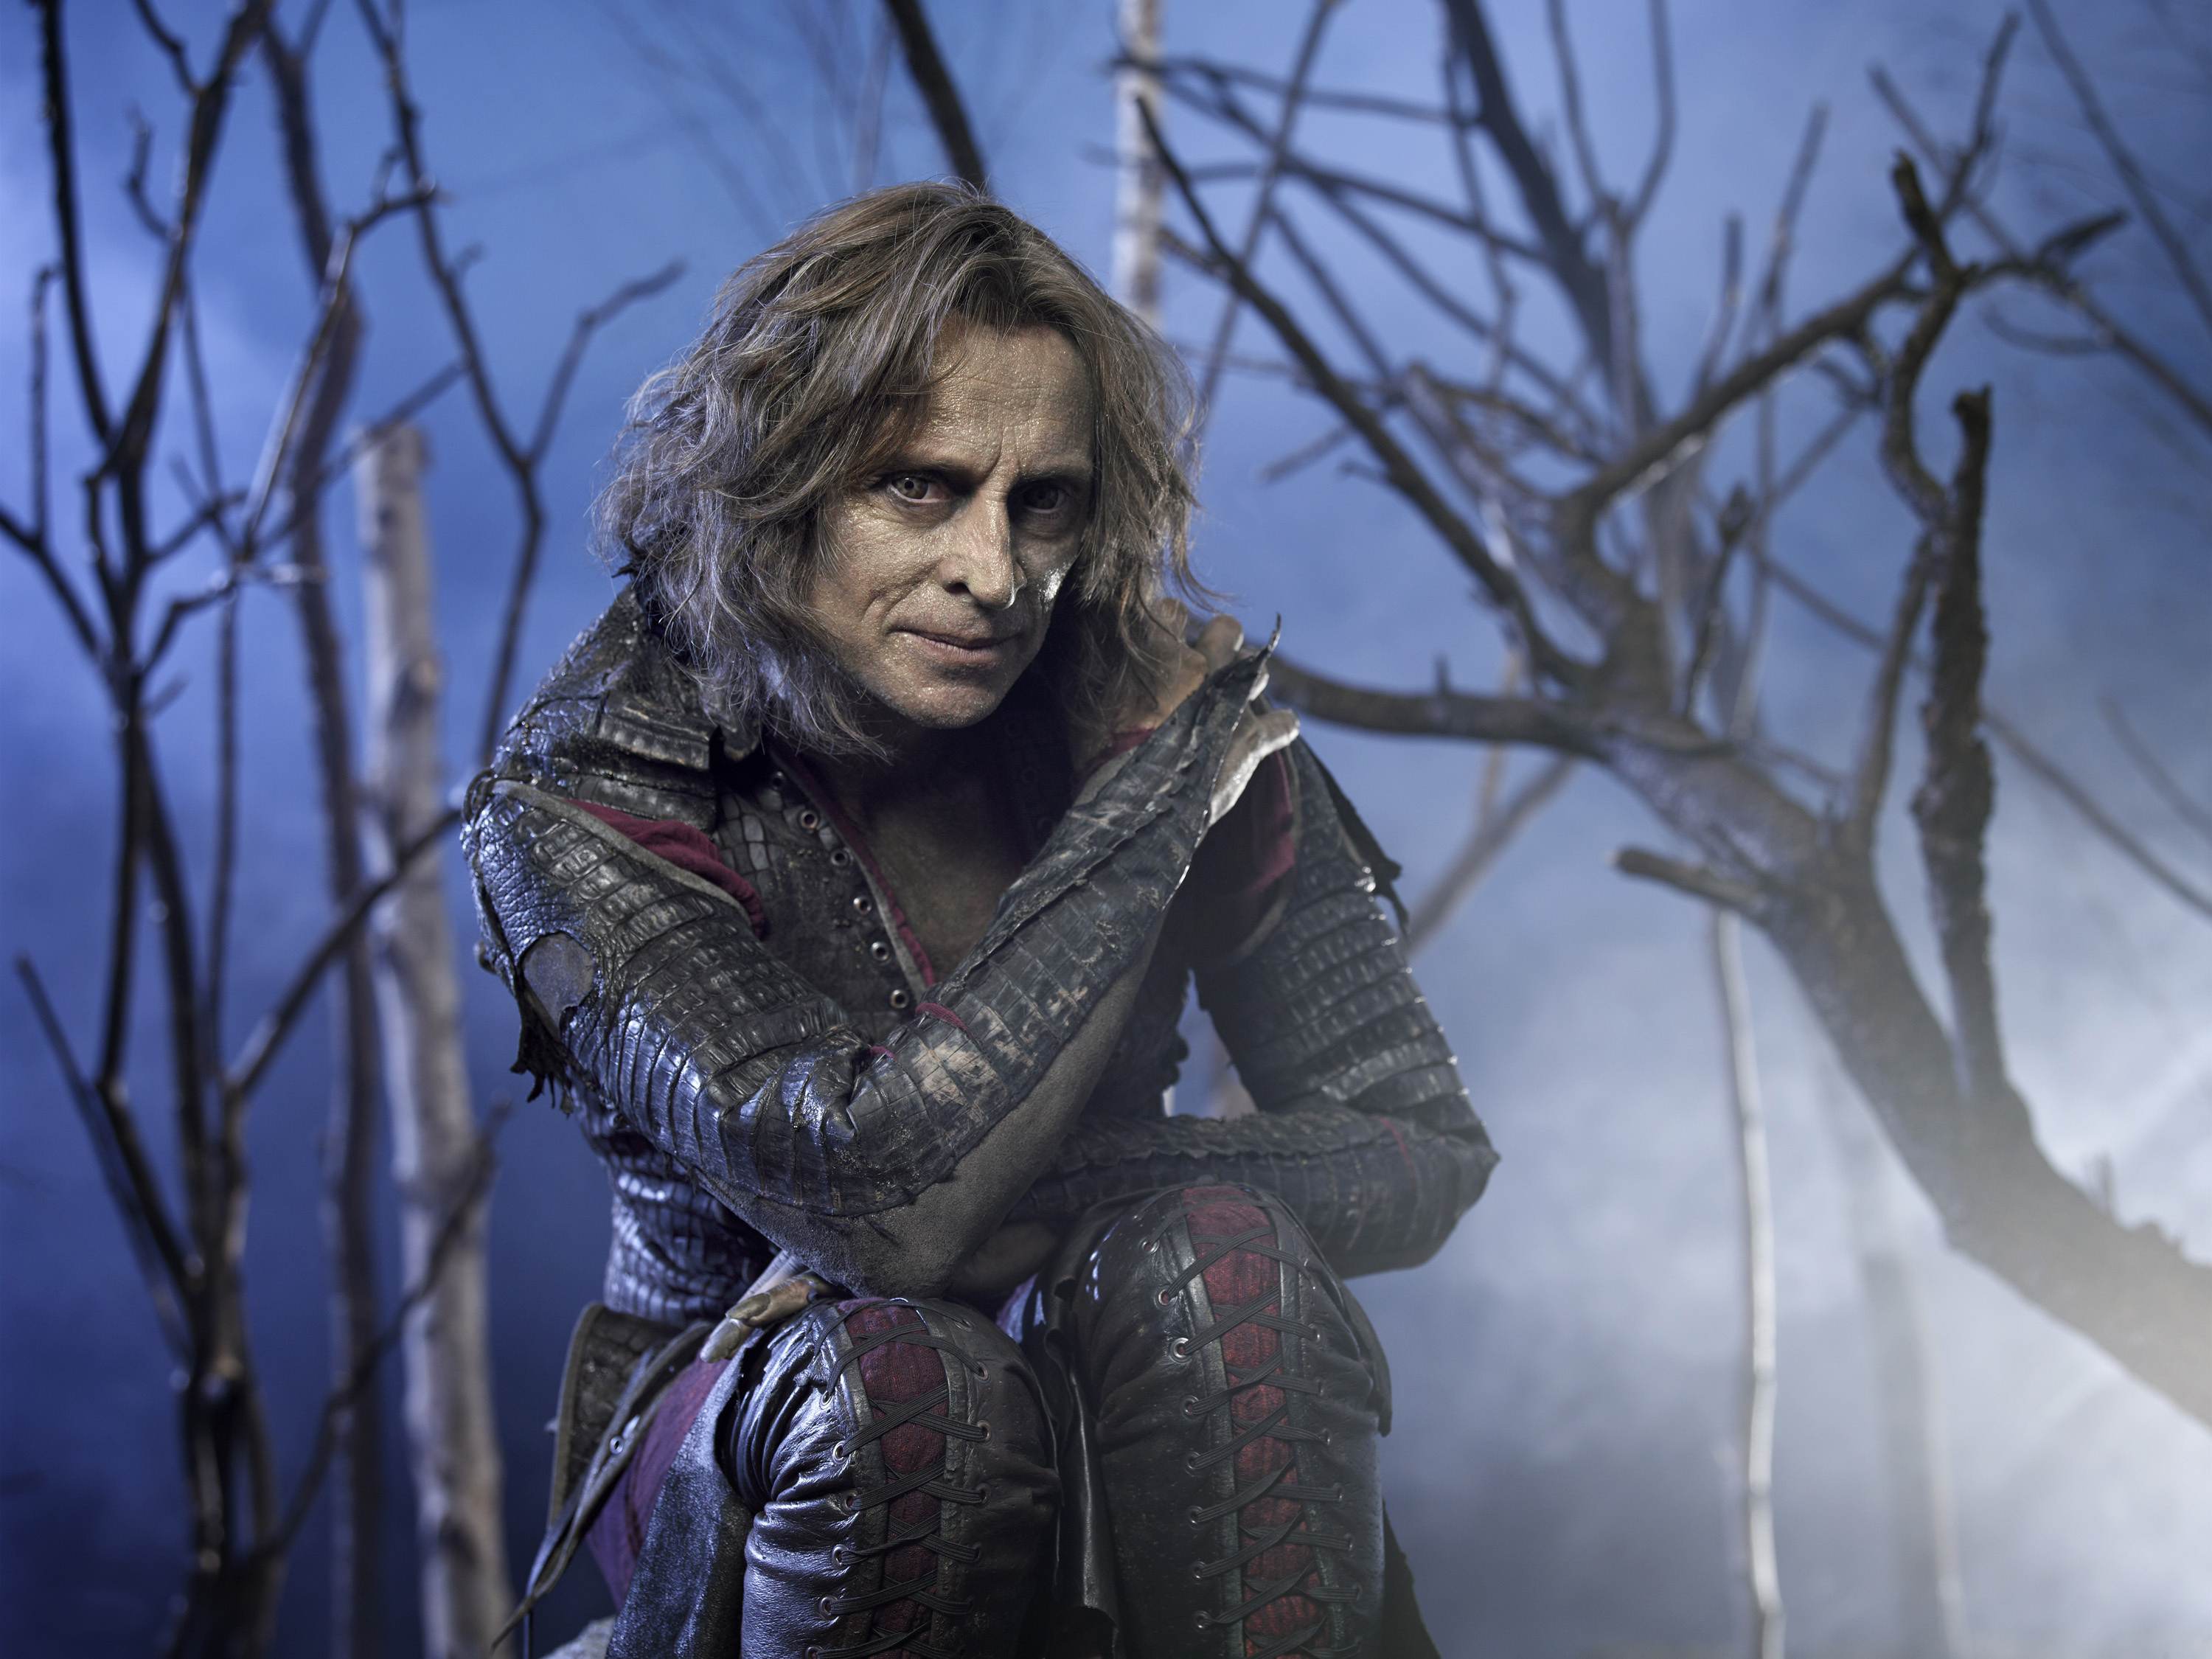 fairy tale, tv show, once upon a time, fantasy, robert carlyle, rumpelstiltskin, wizard